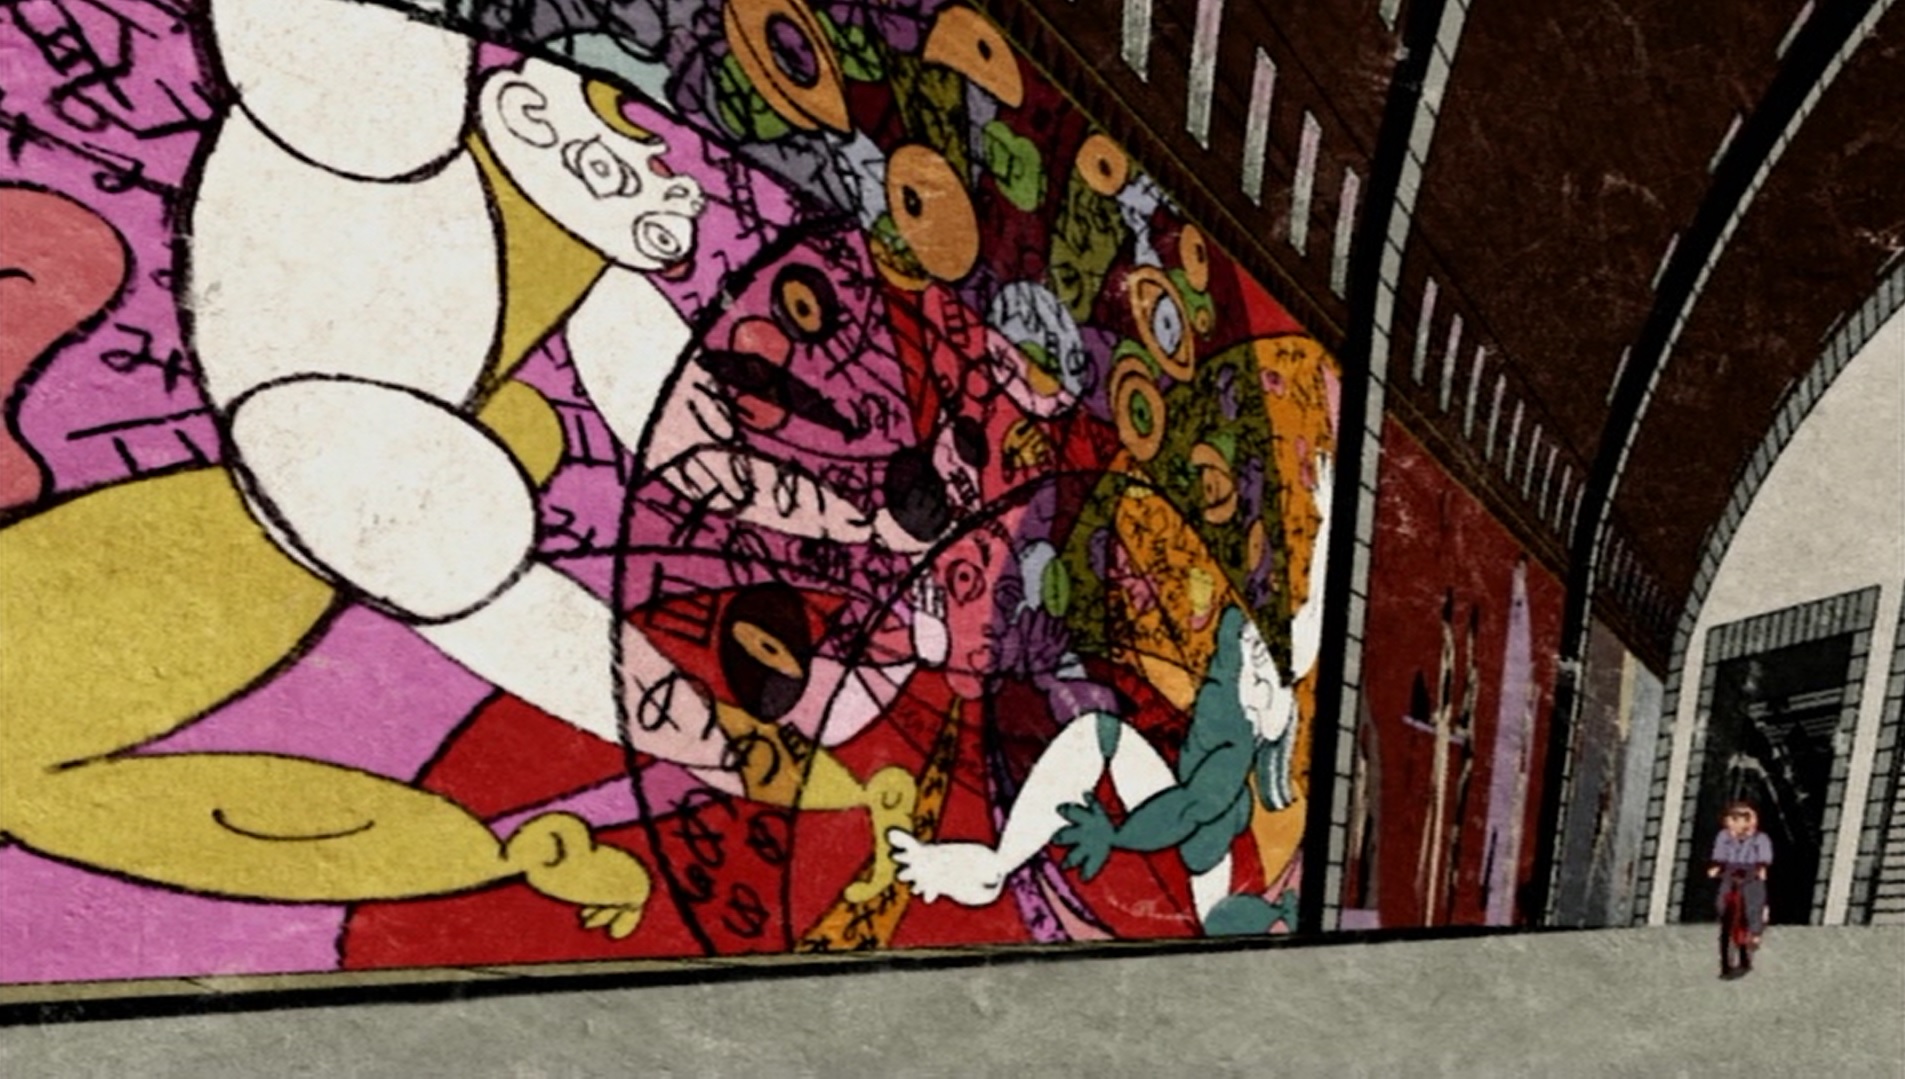 Abstract art mural in a train station with a boy on a bicycle riding backwards on the platform